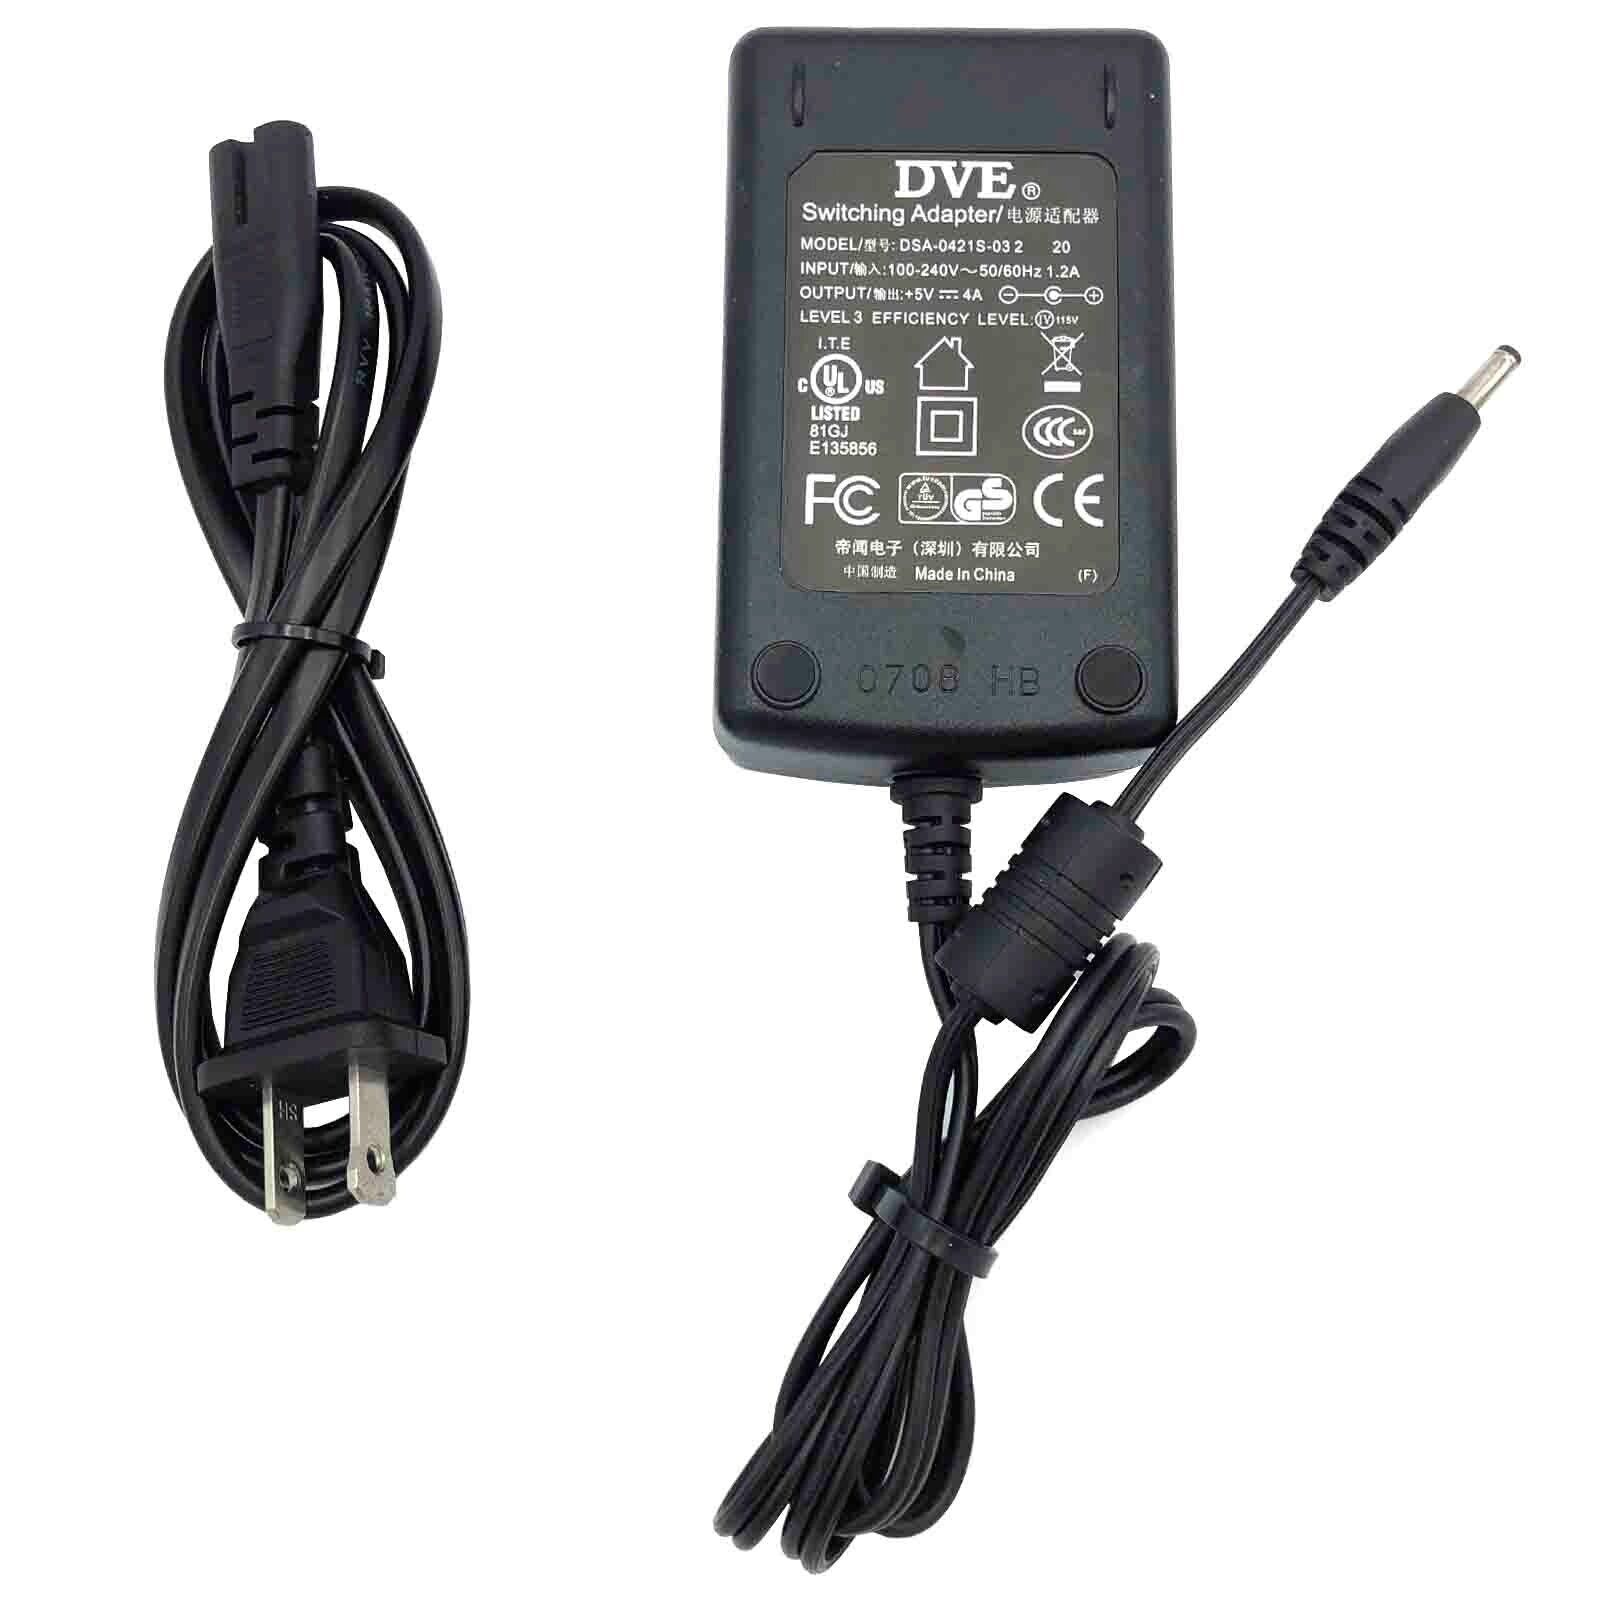 *Brand NEW*Genuine DVE 5V 4A 20W AC Adapter DSA-0421S-03 2 20 Switching Power Supply